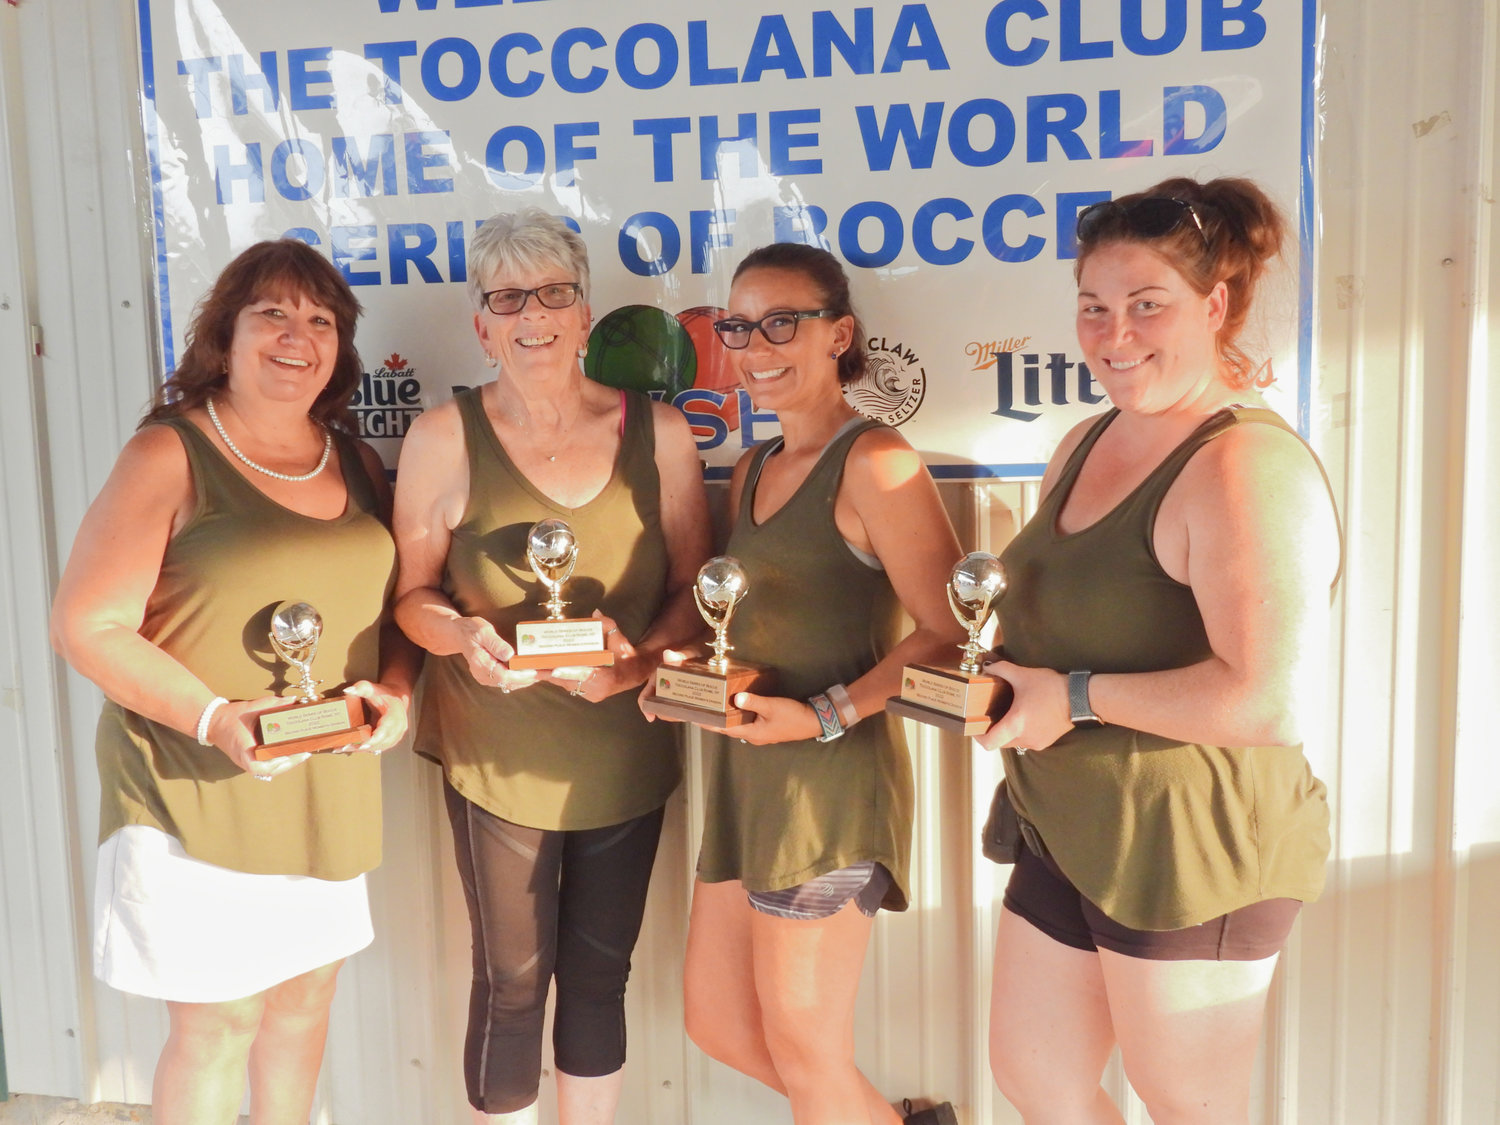 Toccolana Club, consisting of, from left, Sue Hluska, Gail Cortese, Amanda Cortese and Stephanie Calicchia, were the women's division runner-ups.